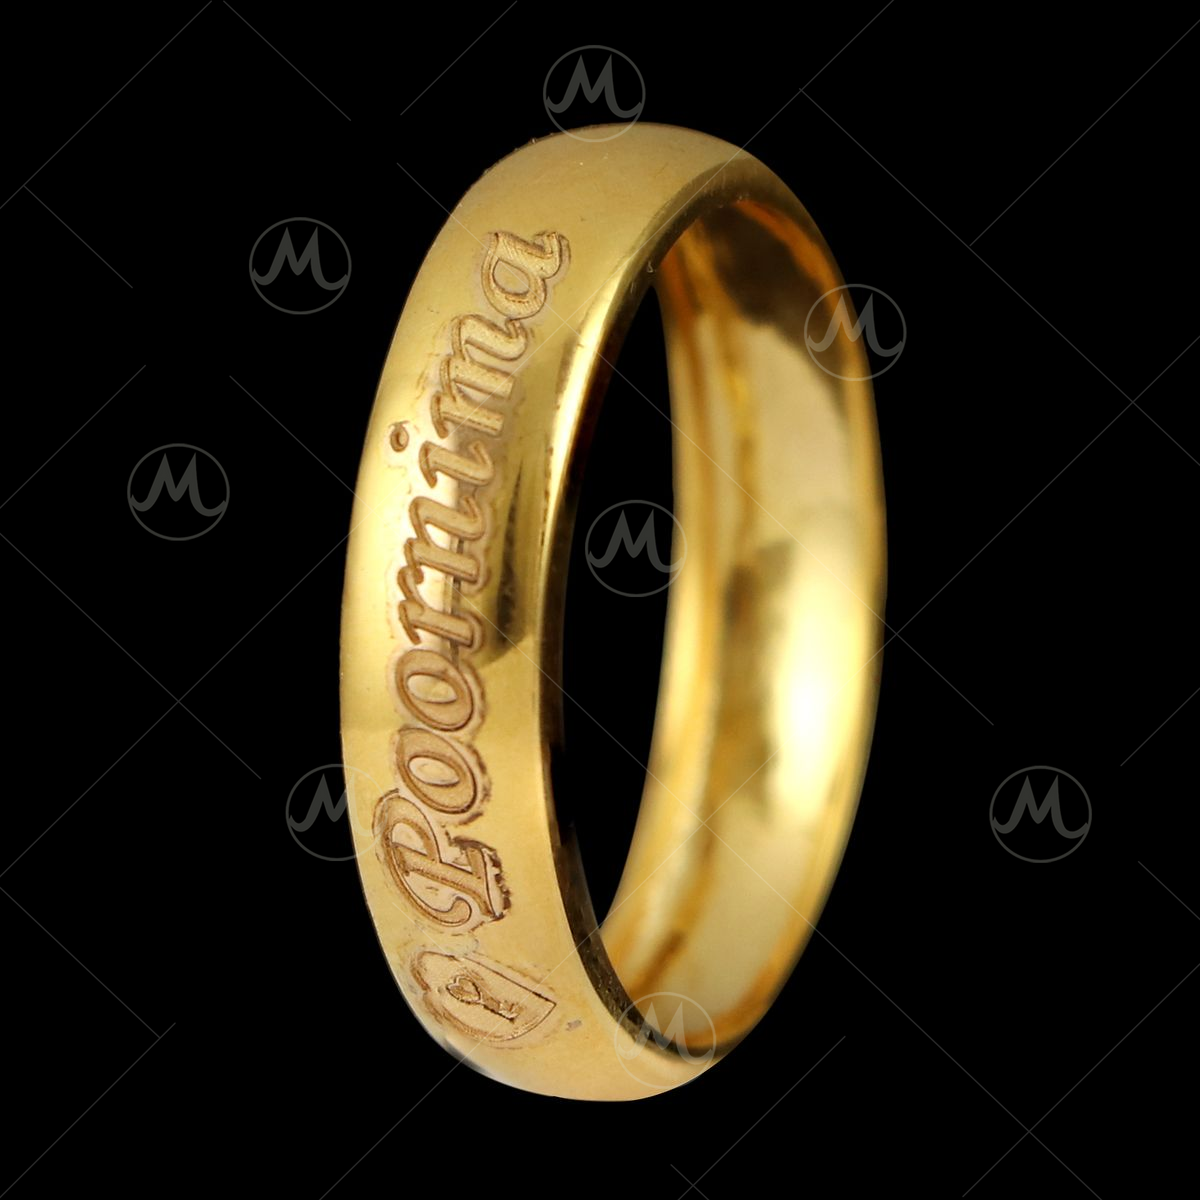 The Process of Making GOLD Wedding Rings - Forging a Lasting Bond. - YouTube